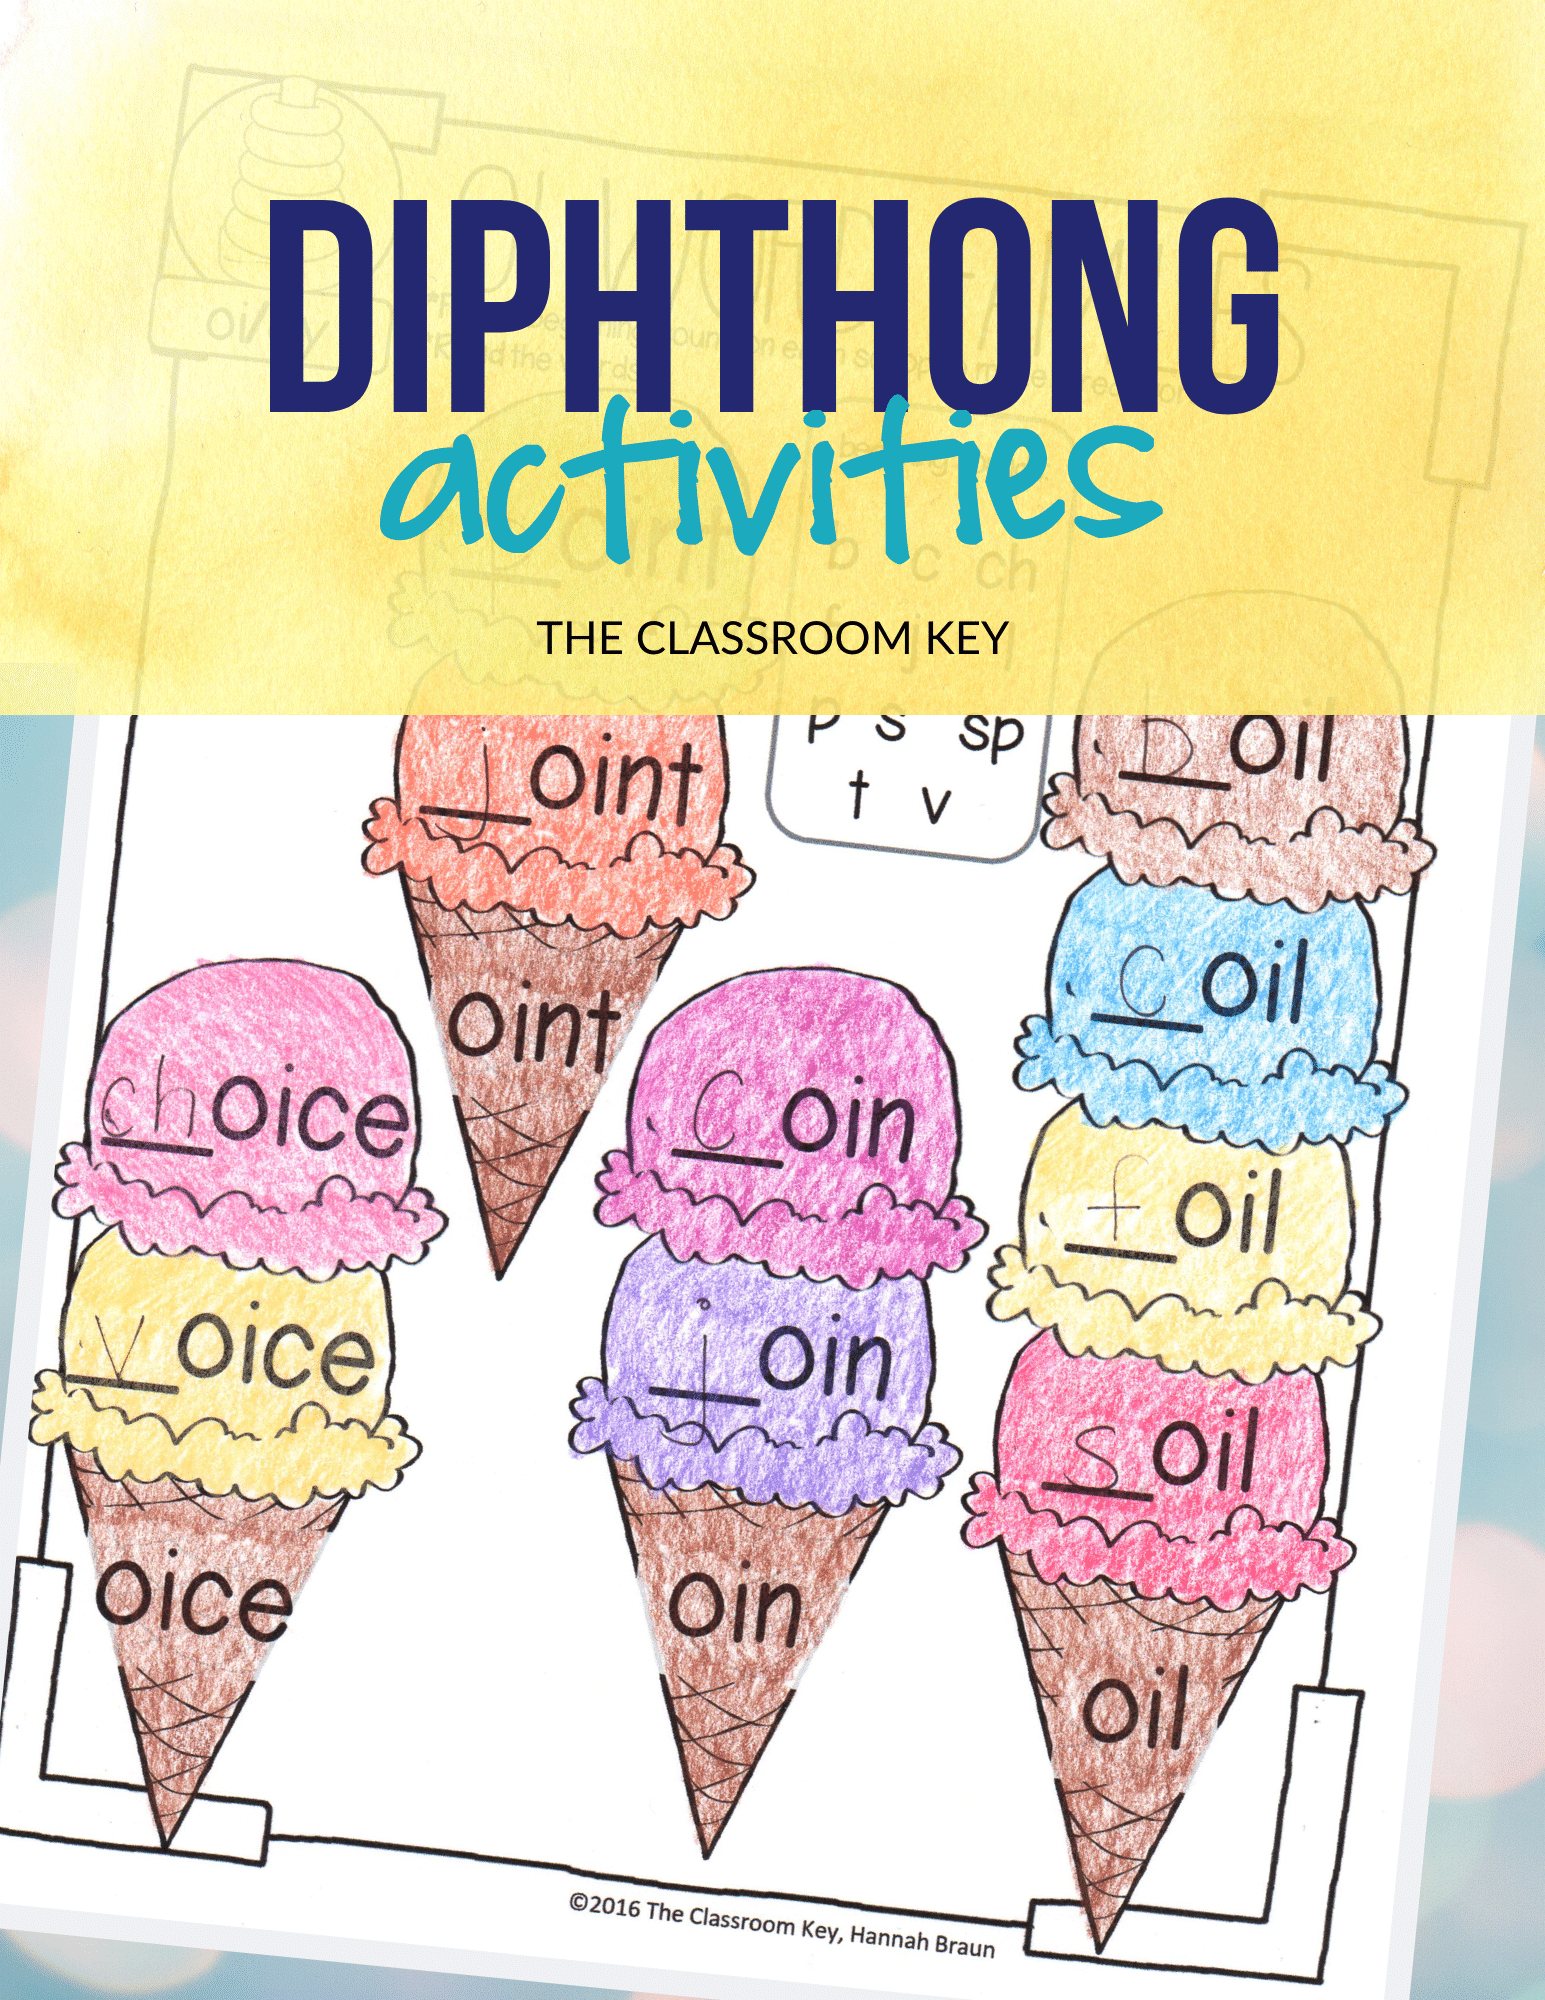 Improve reading skills with worksheets, activities, posters, manipulatives, and an assessment on diphthongs including au, aw, oi, oy, ou, ow and oo. Appropriate for 2nd or 3rd grade. Addresses Common Core standards RF.2.3.B, RF.2.3.E, and RF.3.3.C